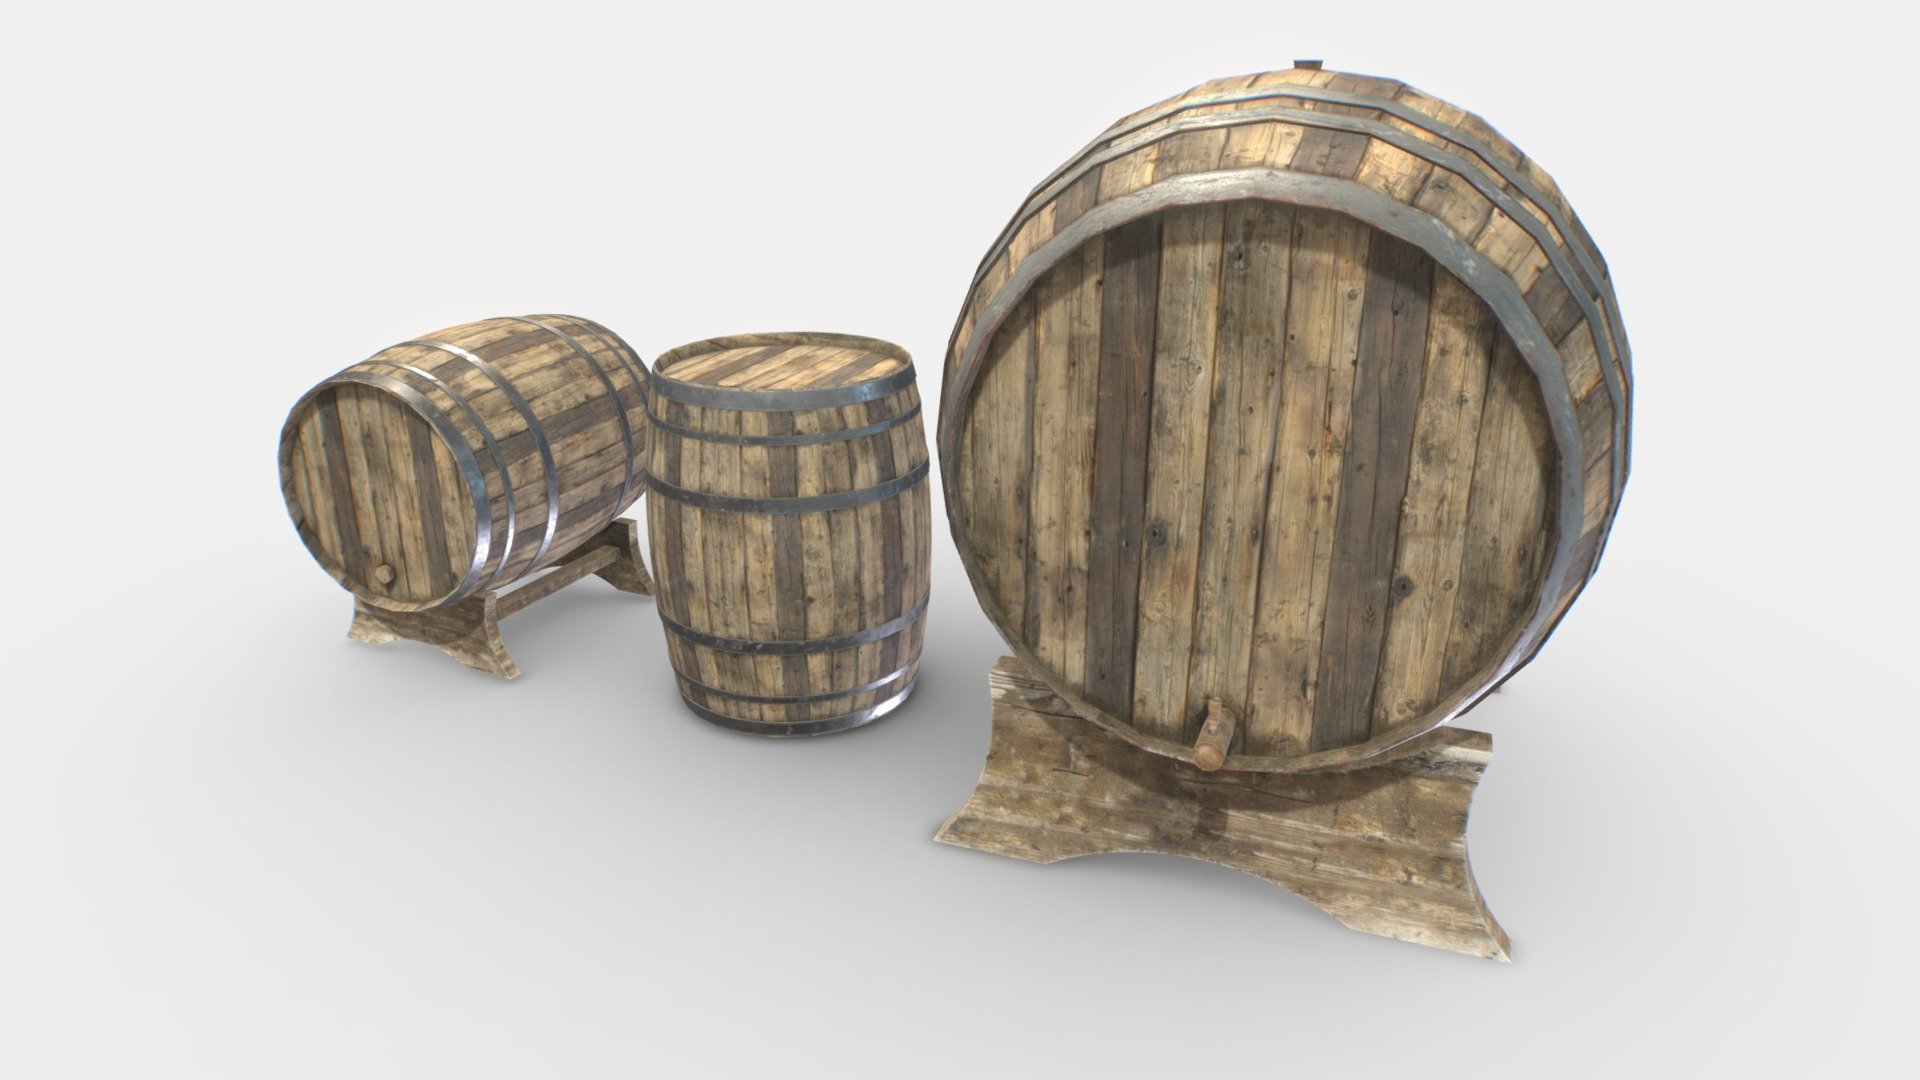 2 wooden barrels based in realistic ones and with 3 pieces, 2 barrels and 1 support.

Comes with PBR 4096pix textures including Albedo, Normal, Roughness, Metalness, AO.

2 texture sets, for big barrel/support and small barrel. TGA textures

Suitable for basements, dungeons, medieval scenes, cellars, etc..

Realistic scale 3d model